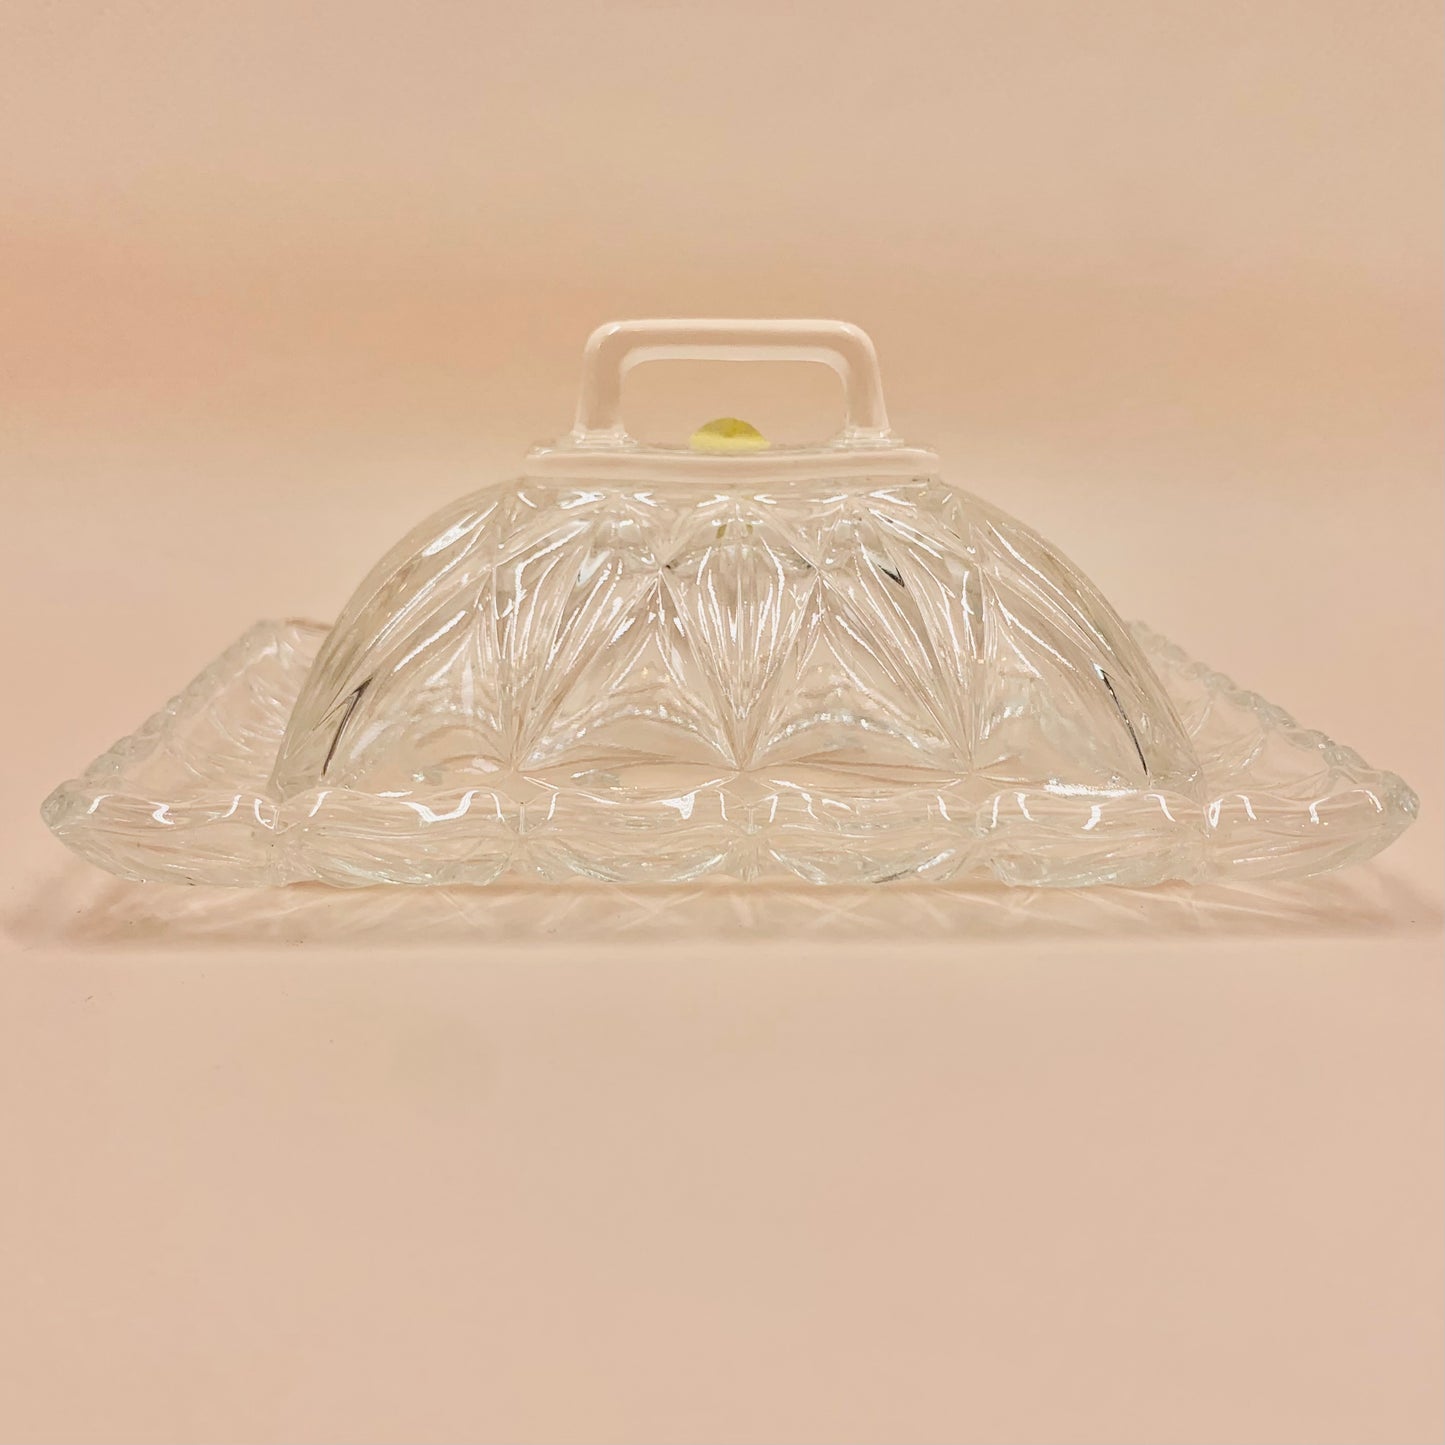 Antique pressed glass butter dish